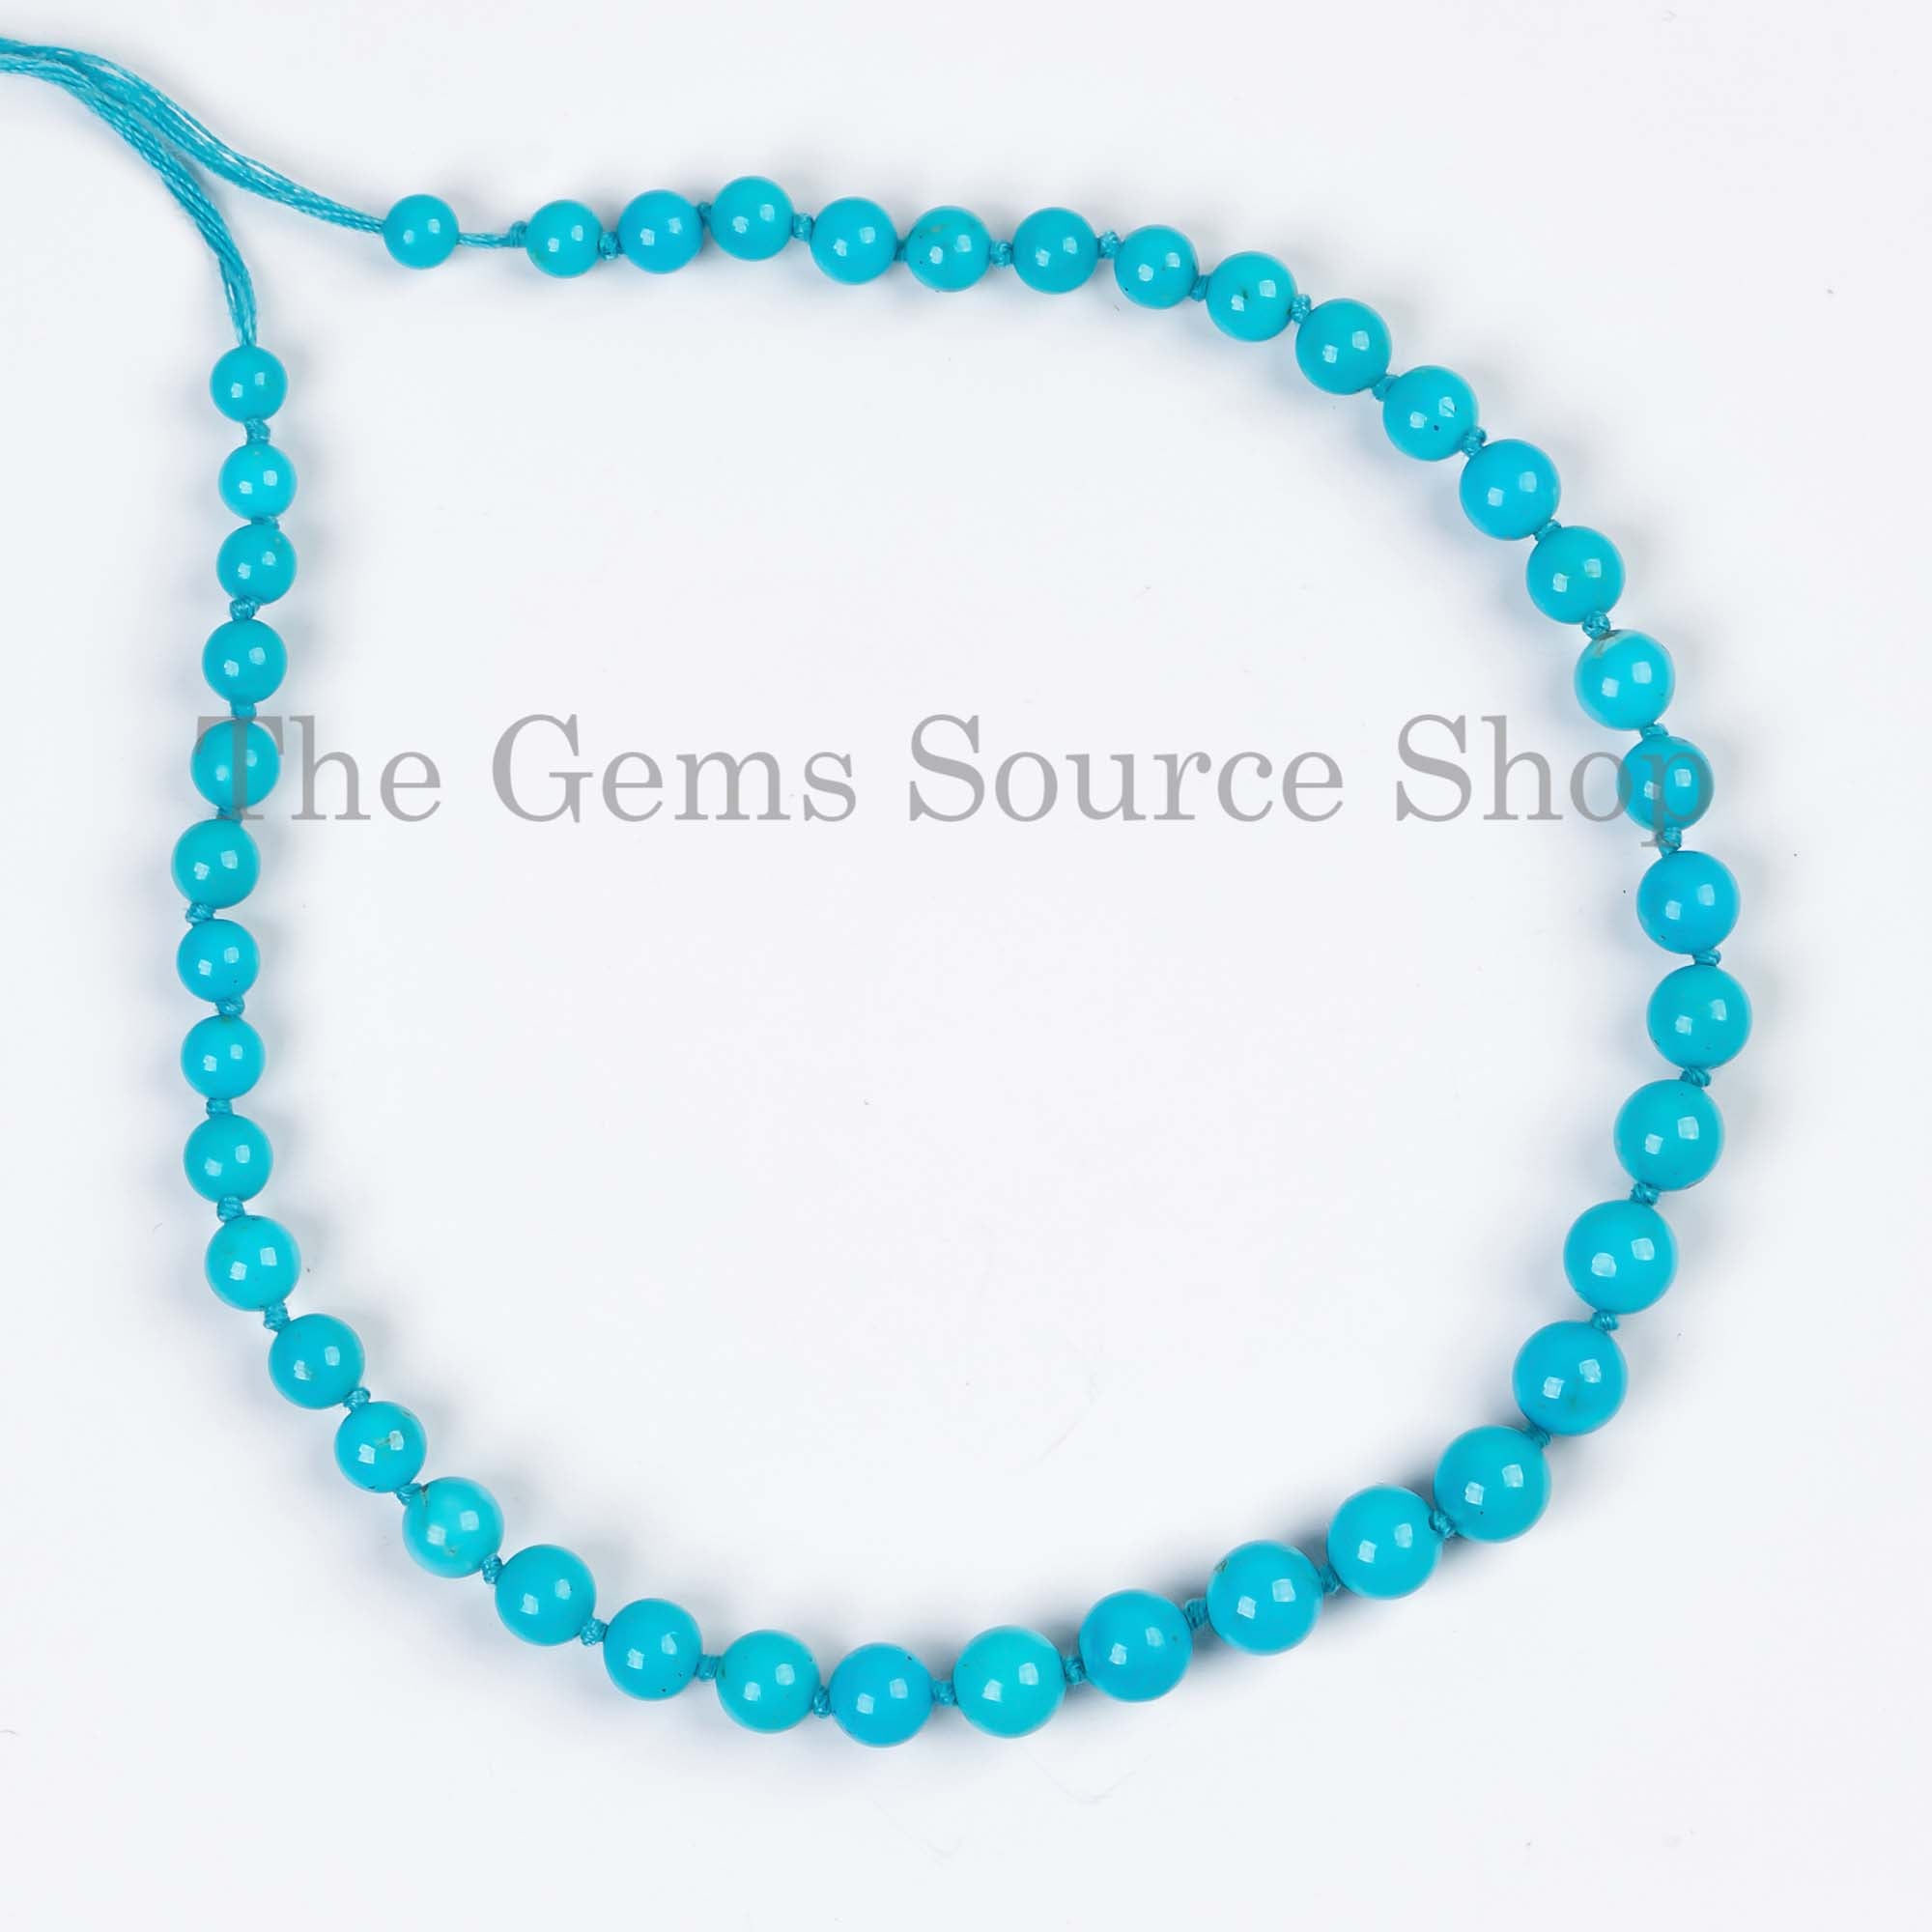 Top Quality Turquoise Plain Round Beads, Smooth Turquoise Round Beads, Turquoise Beads